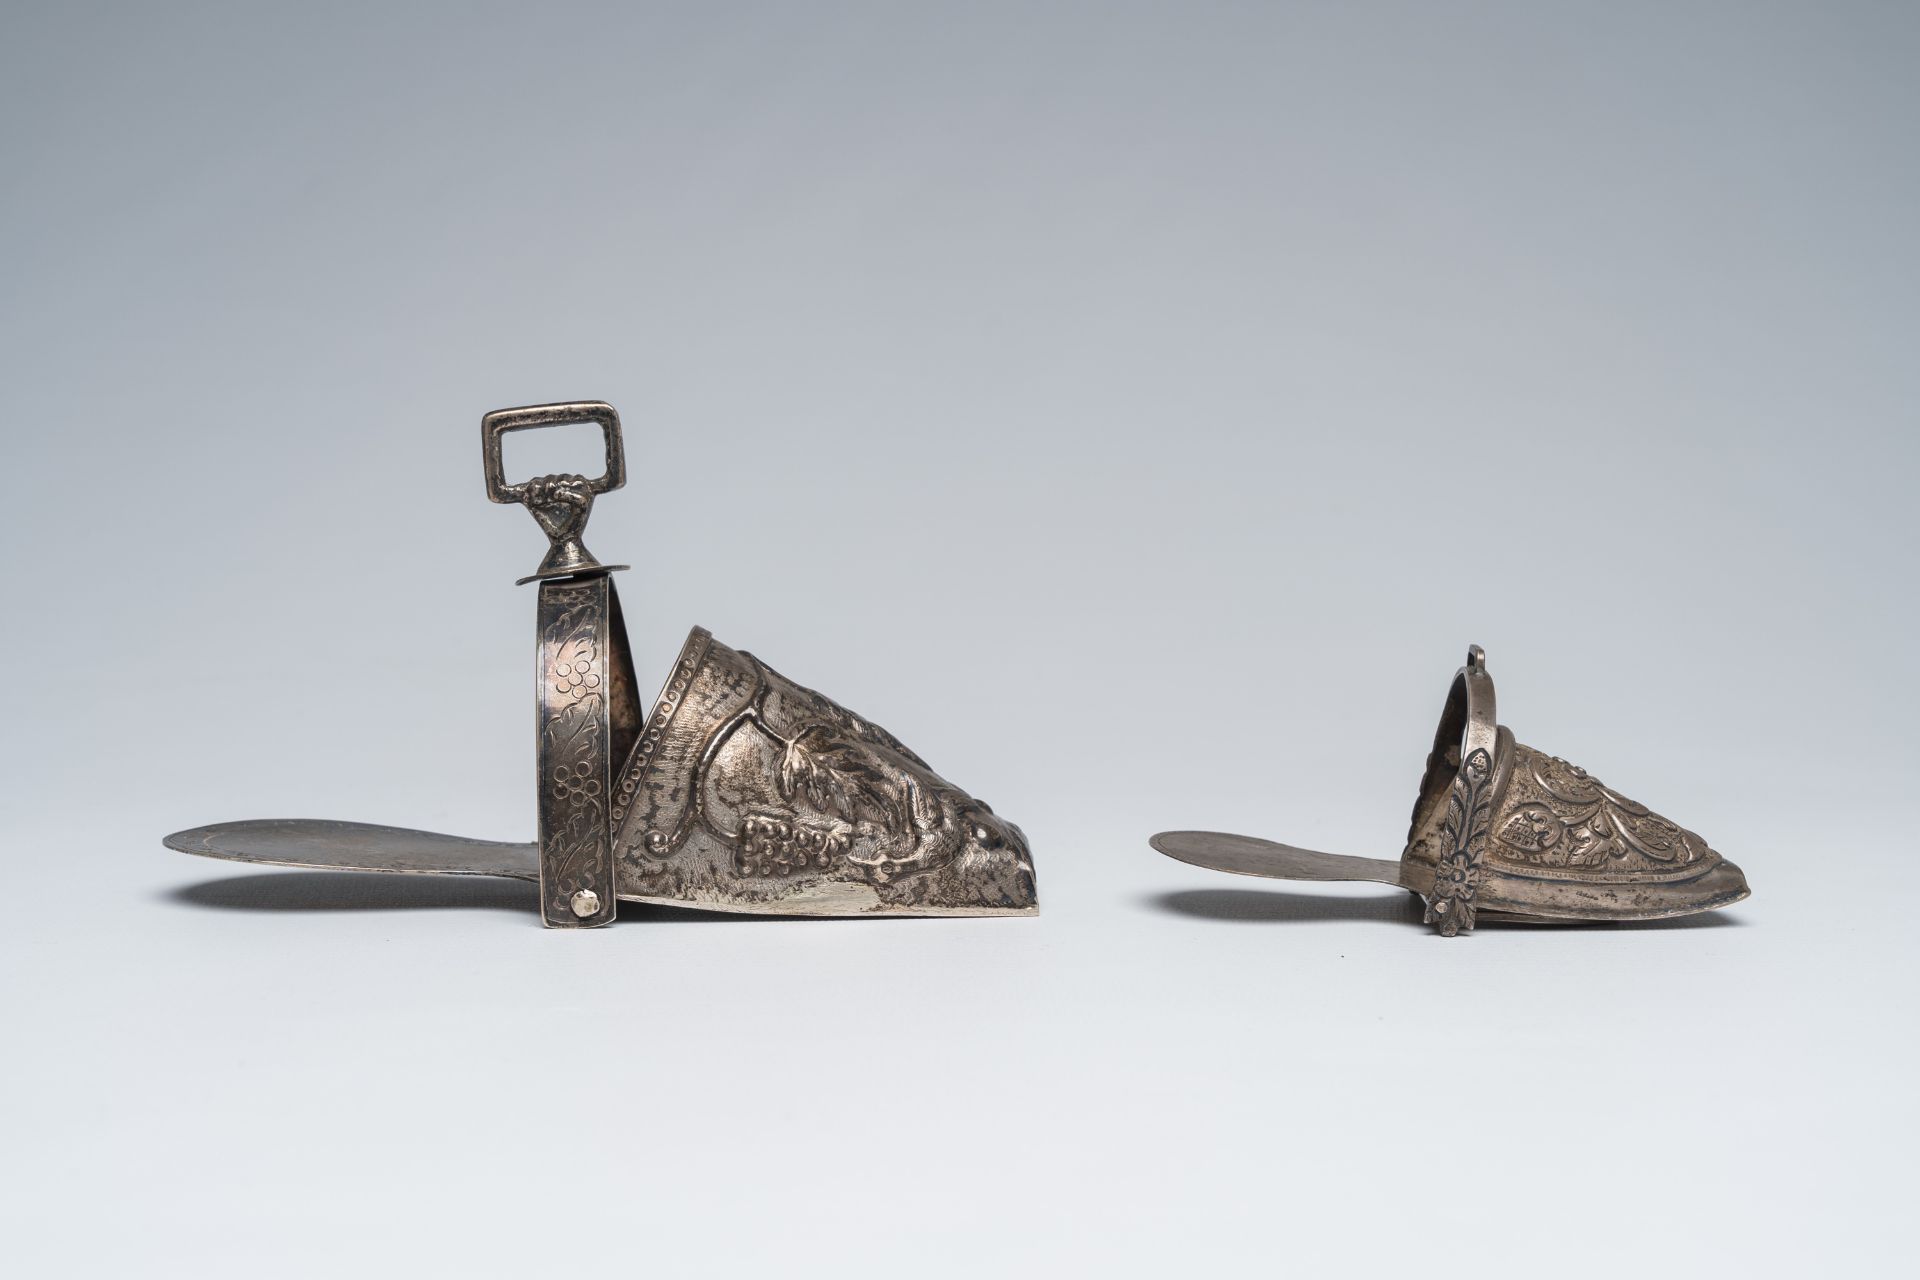 Two Peruvian silver stirrups with floral design, 925/000, 20th C. - Image 4 of 8